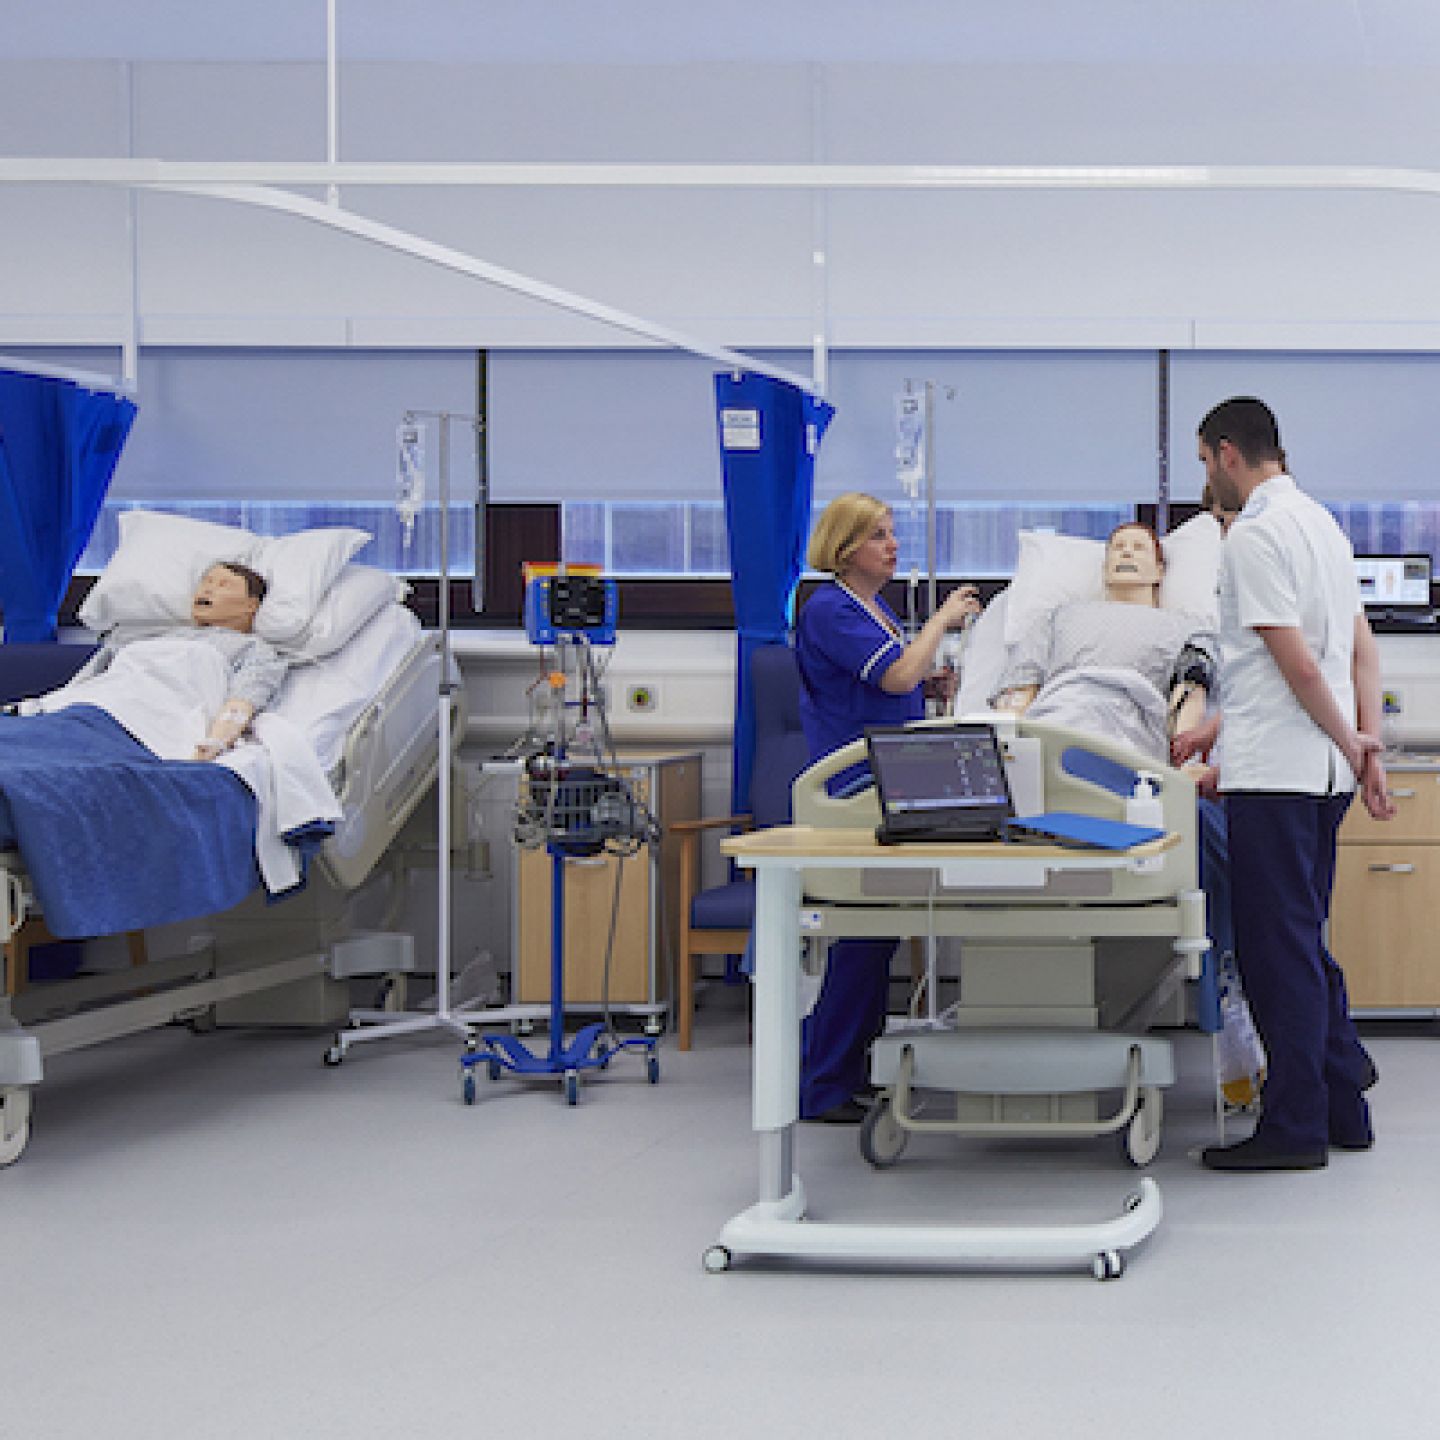 Nurses standing next to patients in beds in the clinical suite